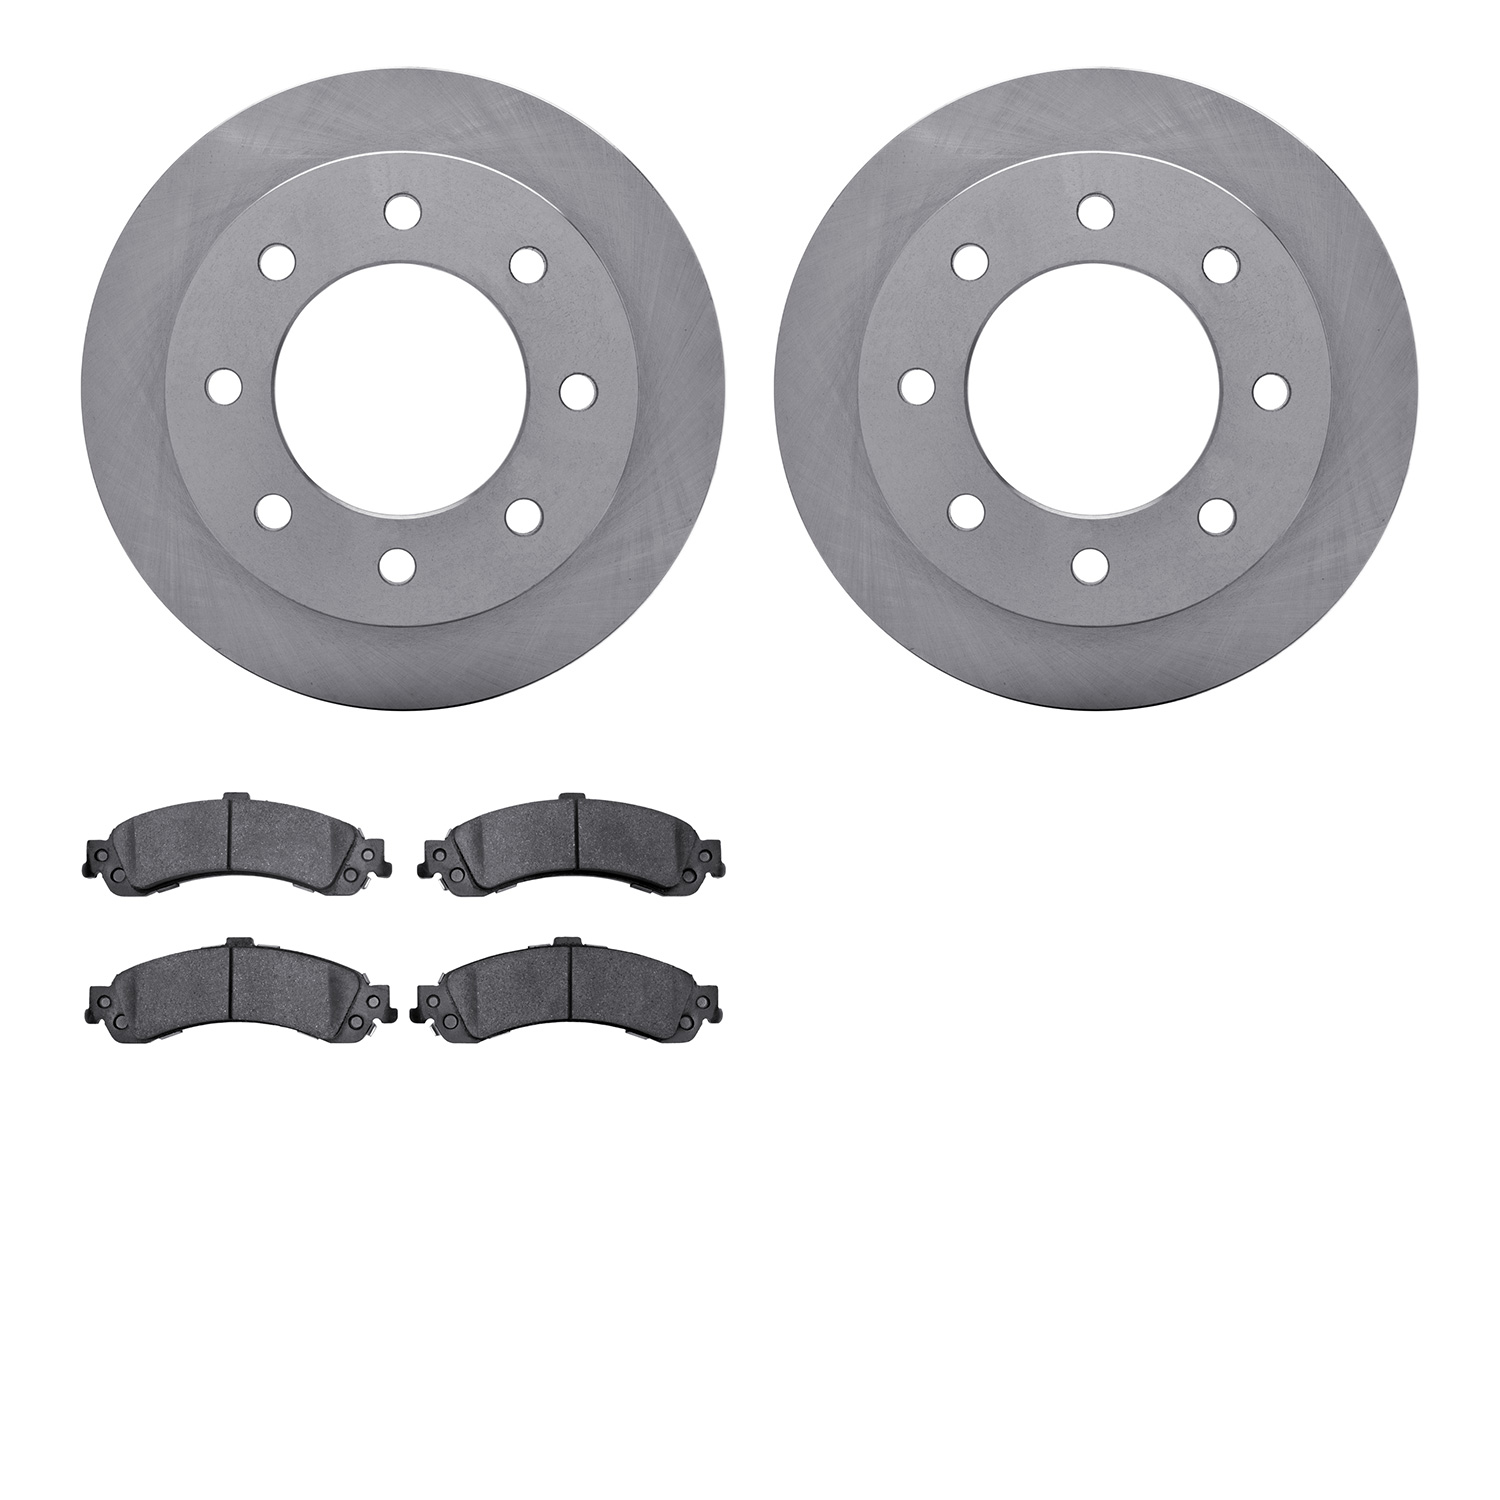 6402-48092 Brake Rotors with Ultimate-Duty Brake Pads, 2005-2005 GM, Position: Rear